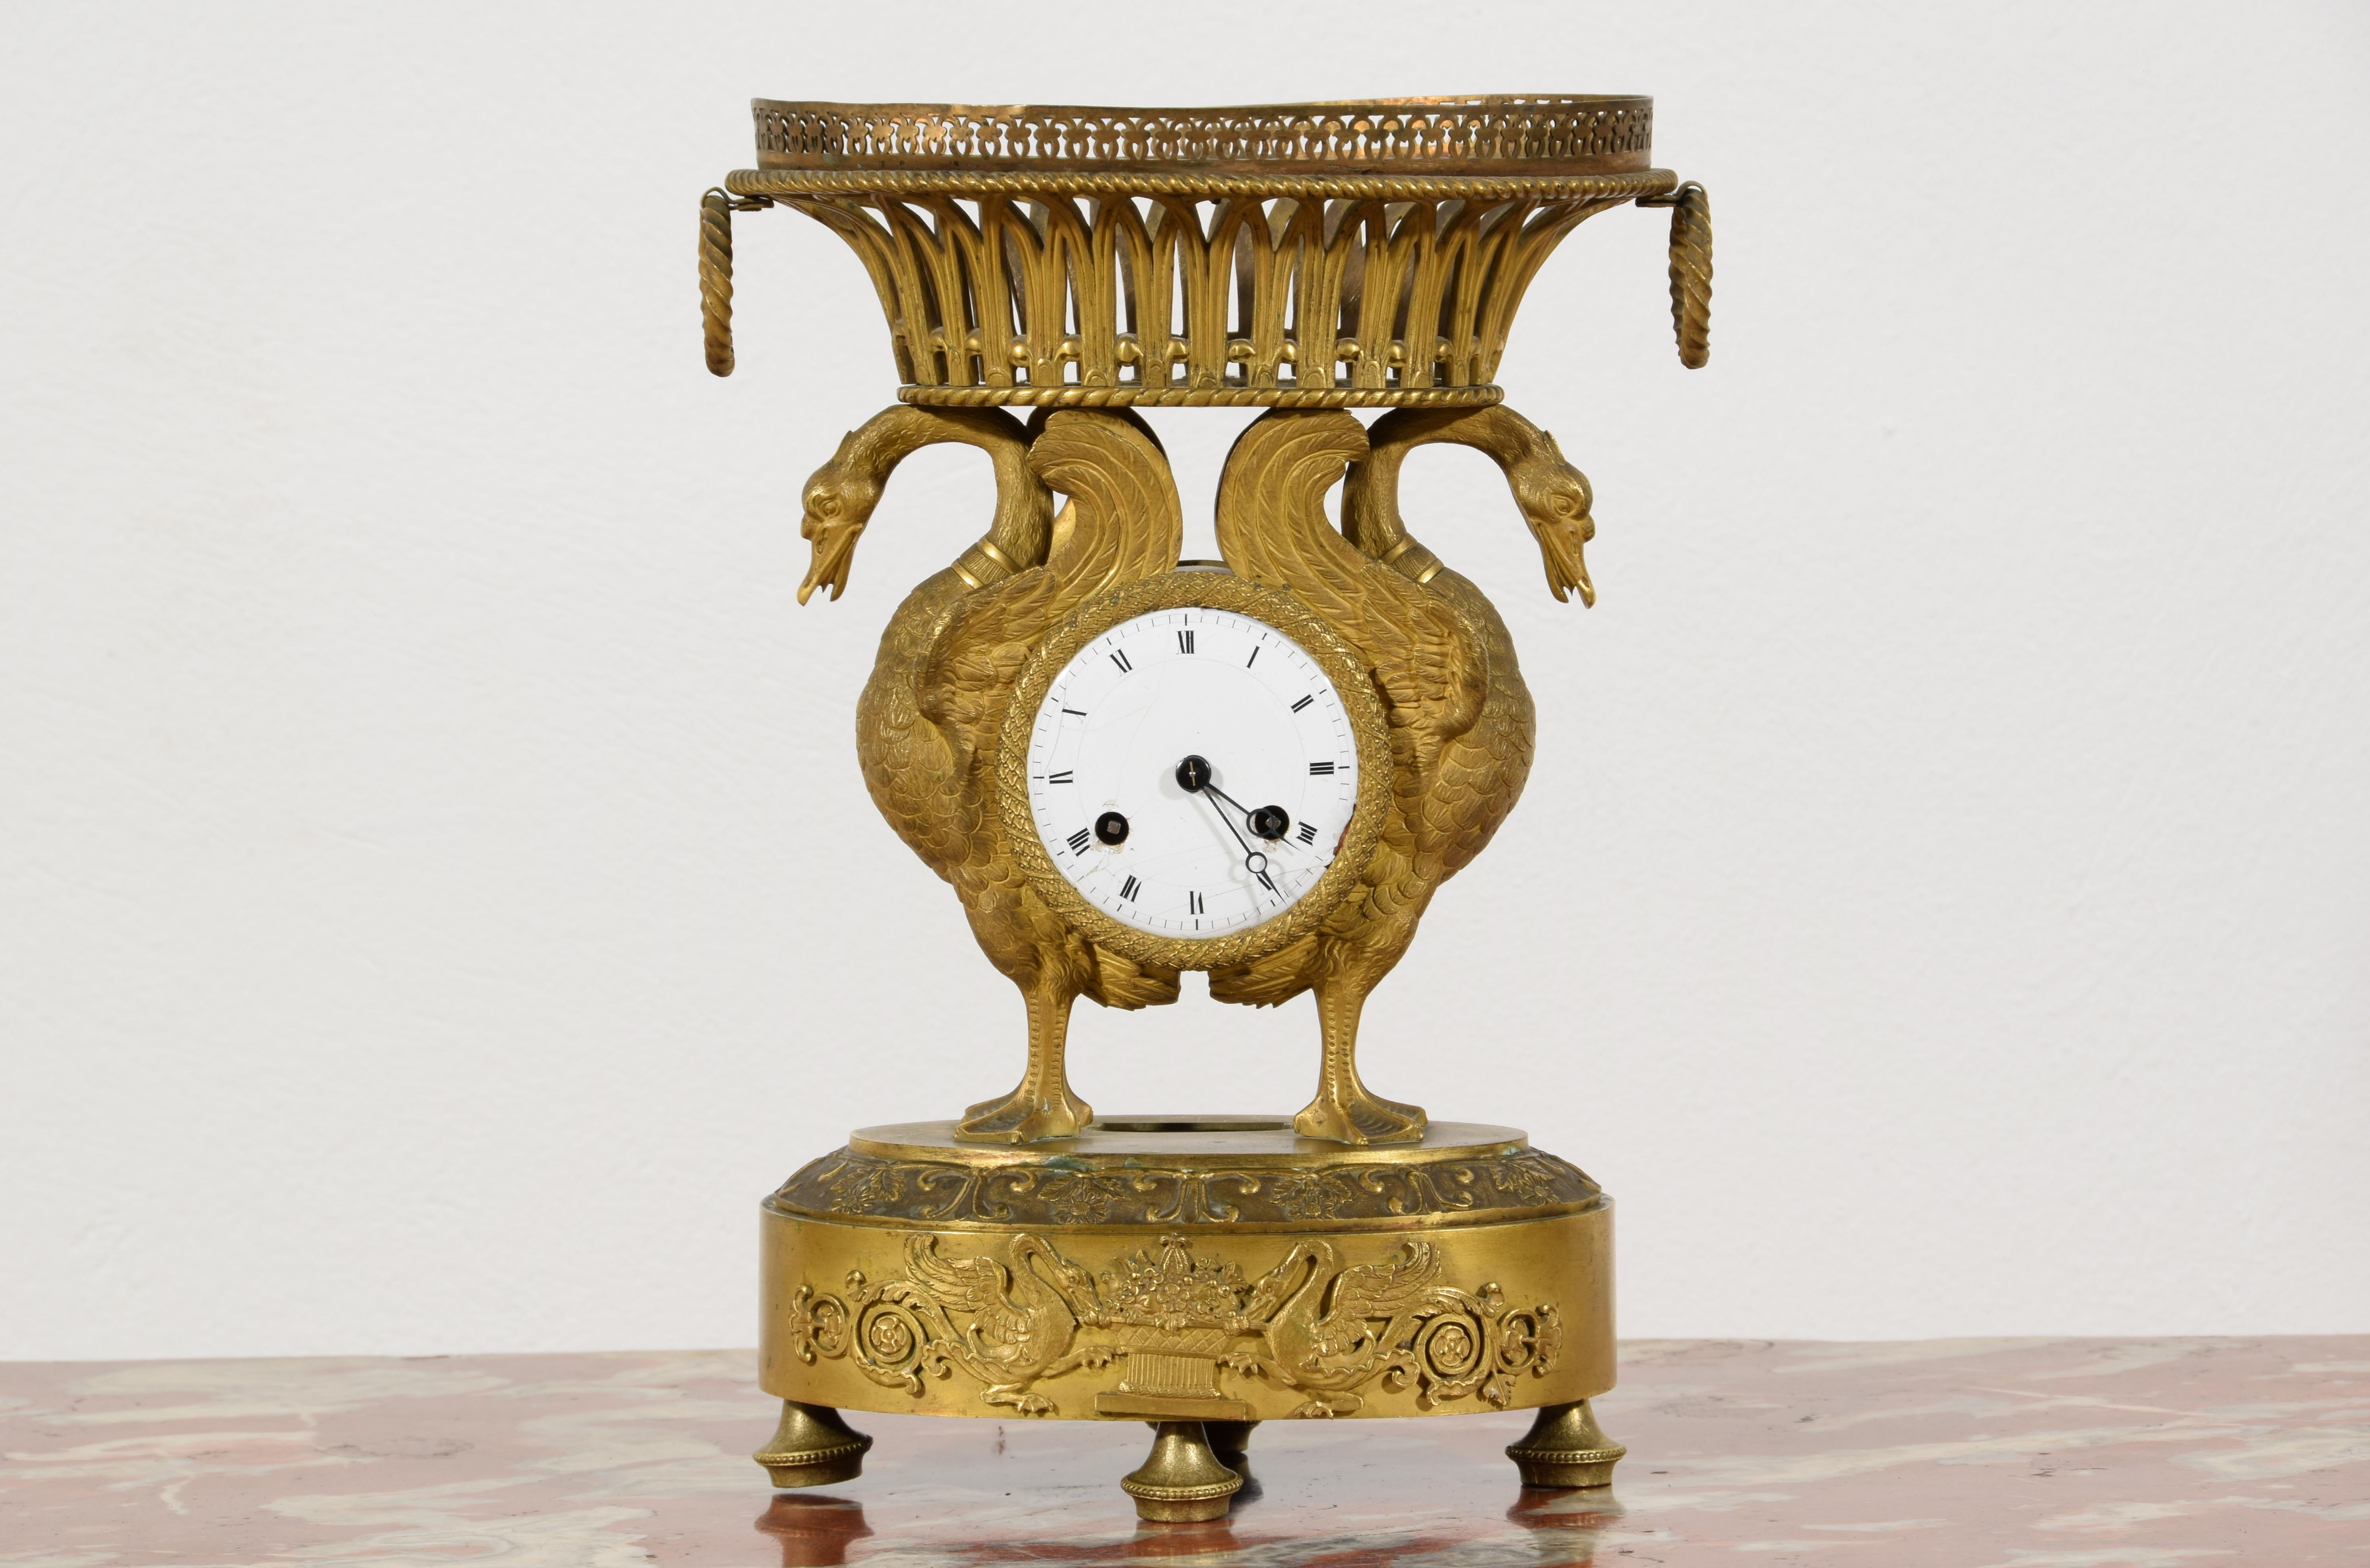 19th century, French chiselled and gilt bronze table clock

This table clock was made of chiselled and gilded bronze in the early 19th century in France, Empire era. The bronze structure consists of a central part, in which the watch case is